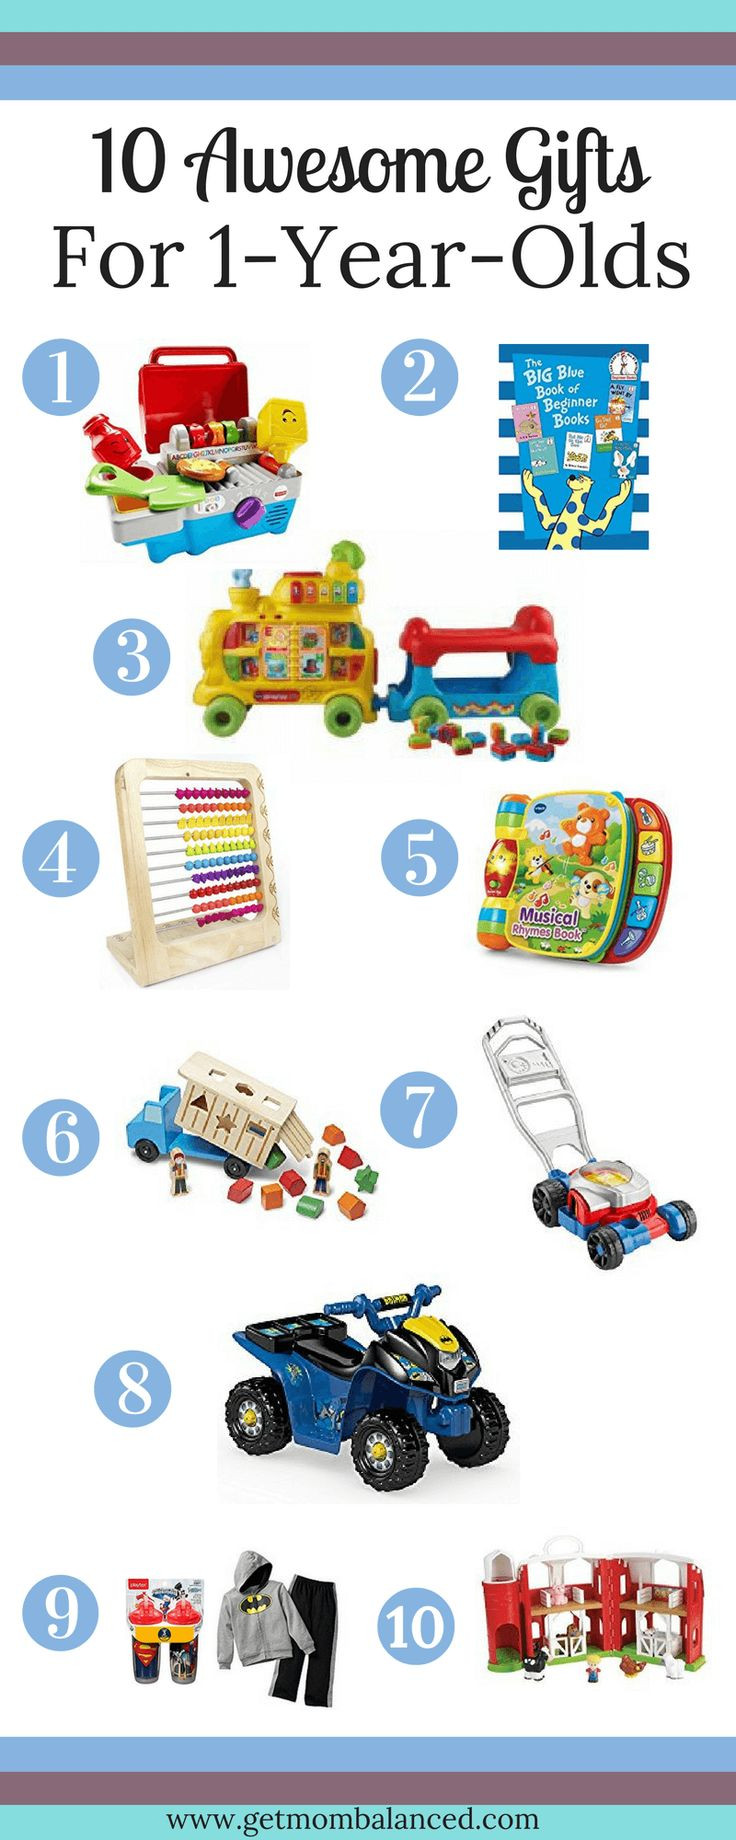 5 Month Old Christmas Gift Ideas
 10 Awesome Gifts for 1 Year Olds